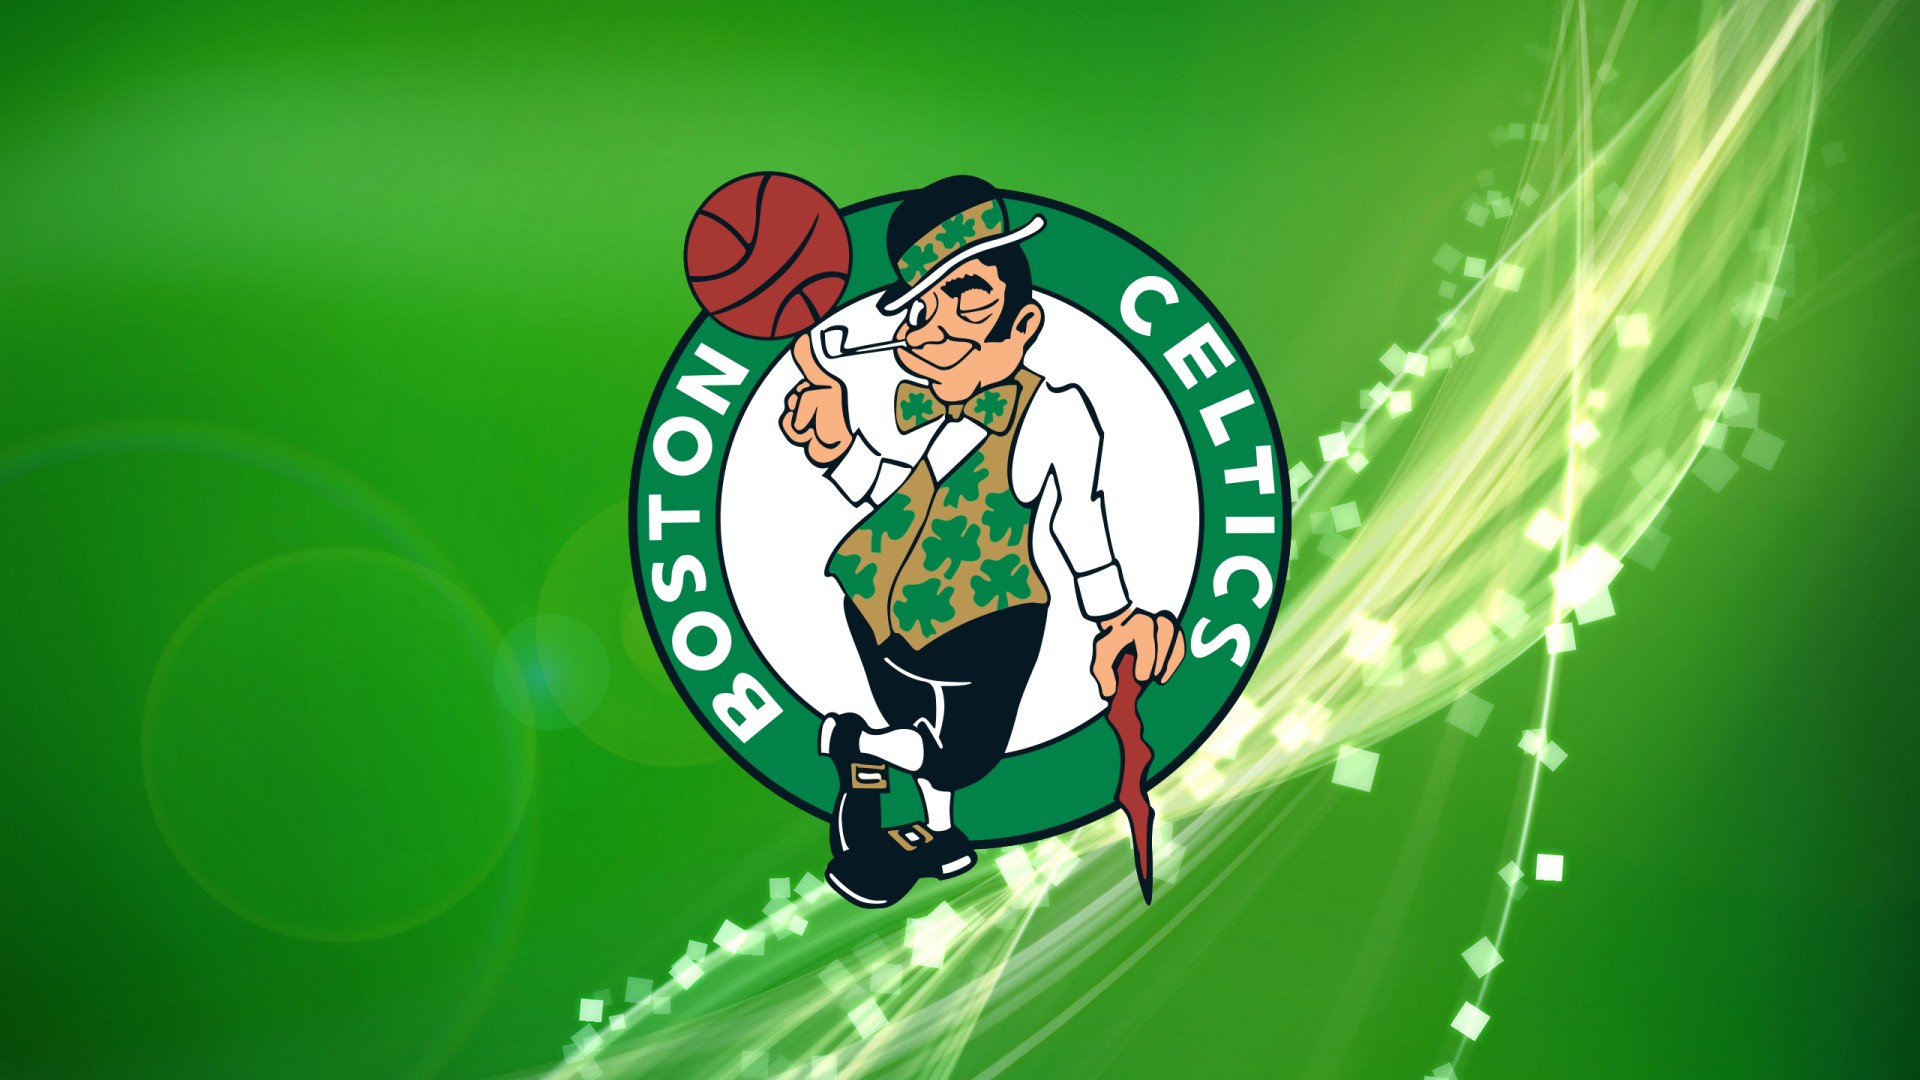 Boston Celtics Logo Desktop Wallpaper with image dimensions 1920x1080 pixel. You can make this wallpaper for your Desktop Computer Backgrounds, Windows or Mac Screensavers, iPhone Lock screen, Tablet or Android and another Mobile Phone device